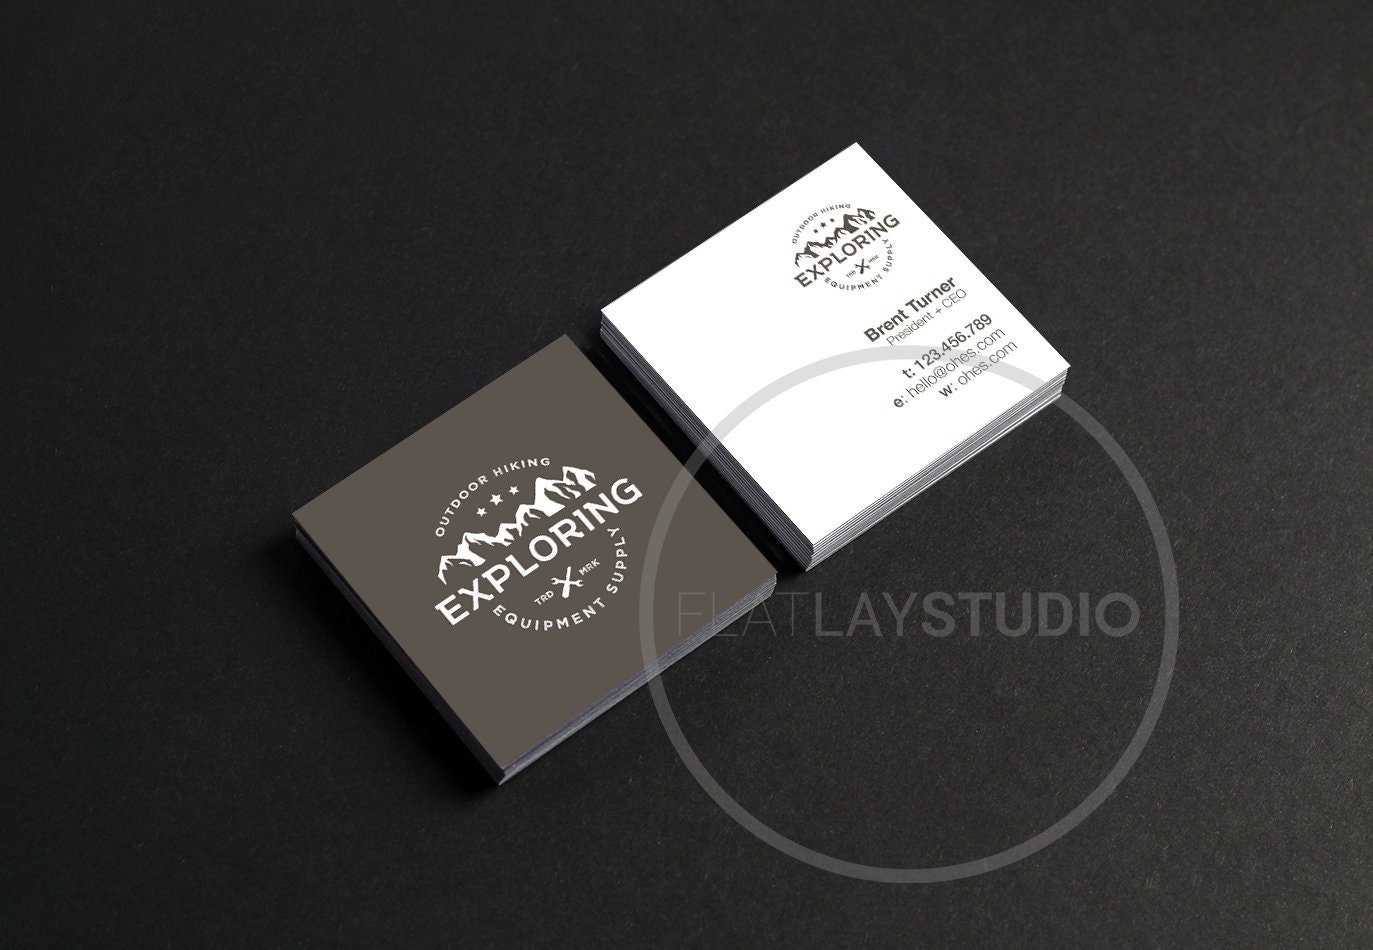 Blank Business Cards Anodized Aluminum 86x54mm 3.4 X 2.125 Black Glossy for  Laser Engraving 0.2mm Thickness 